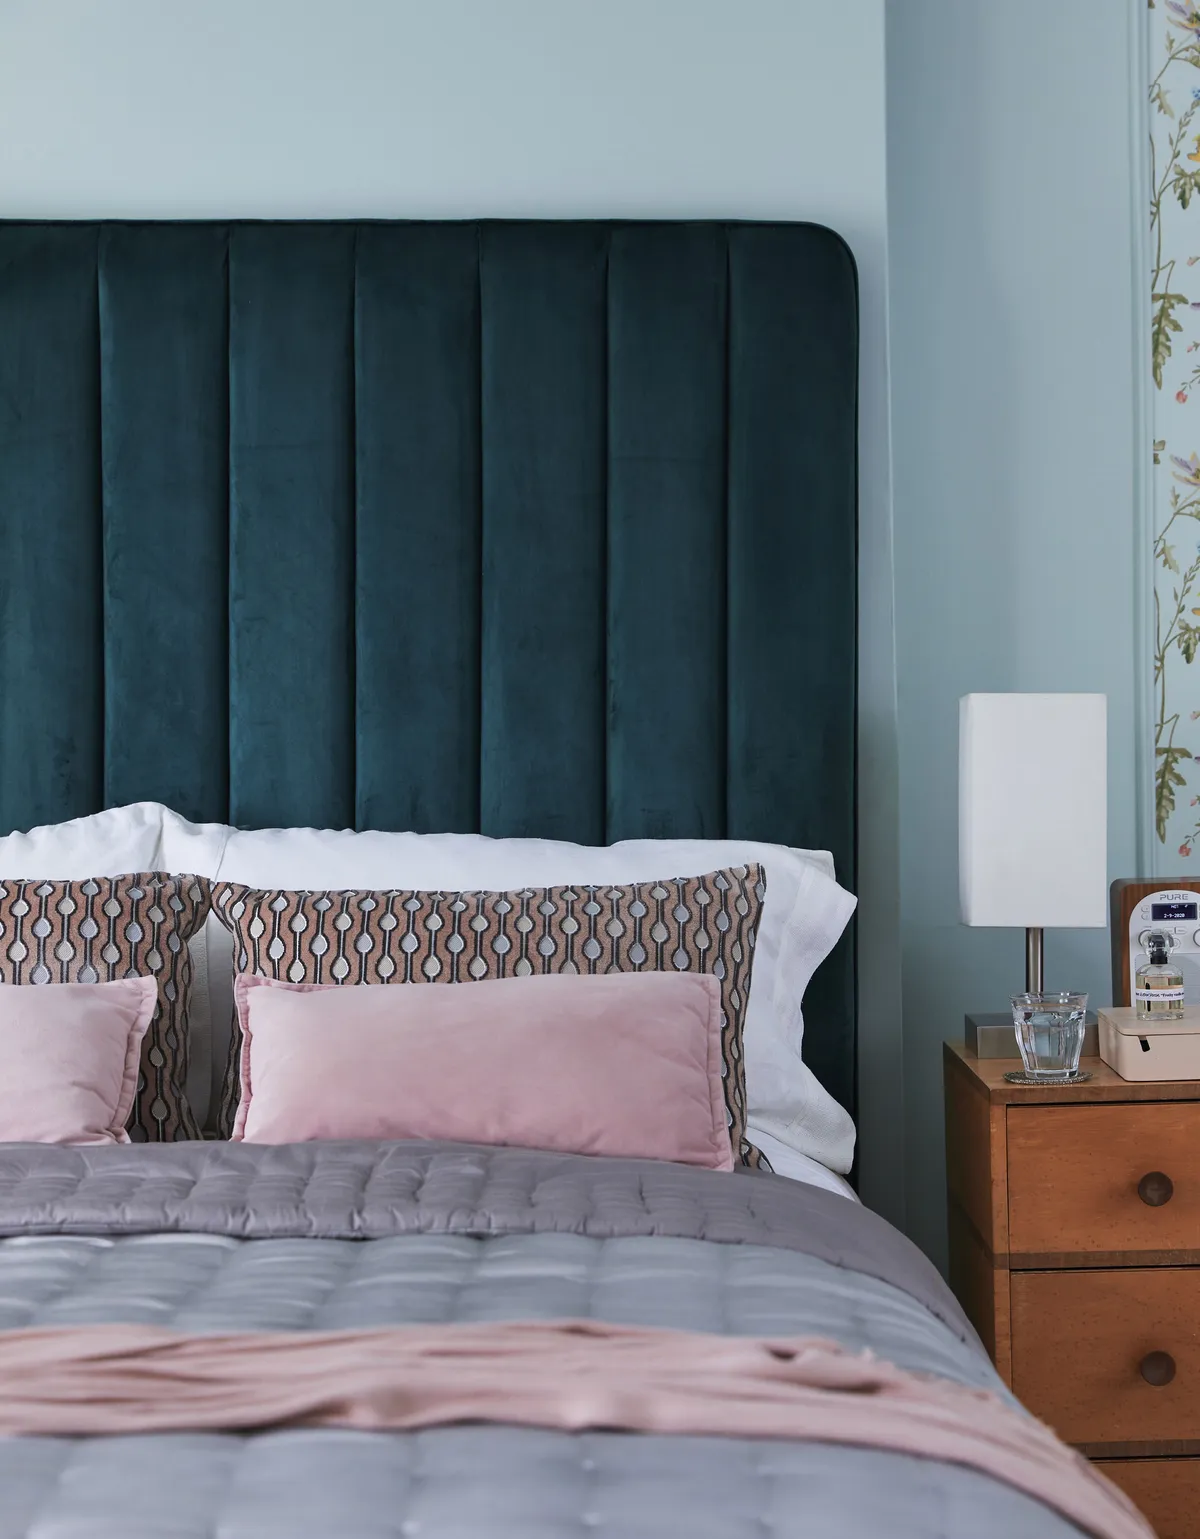 Add a headboard to instantly turn a basic bed base into a feature. Beverley re-upholstered an existing headboard, but you’ll find plenty of similar designs online at Wayfair or Very